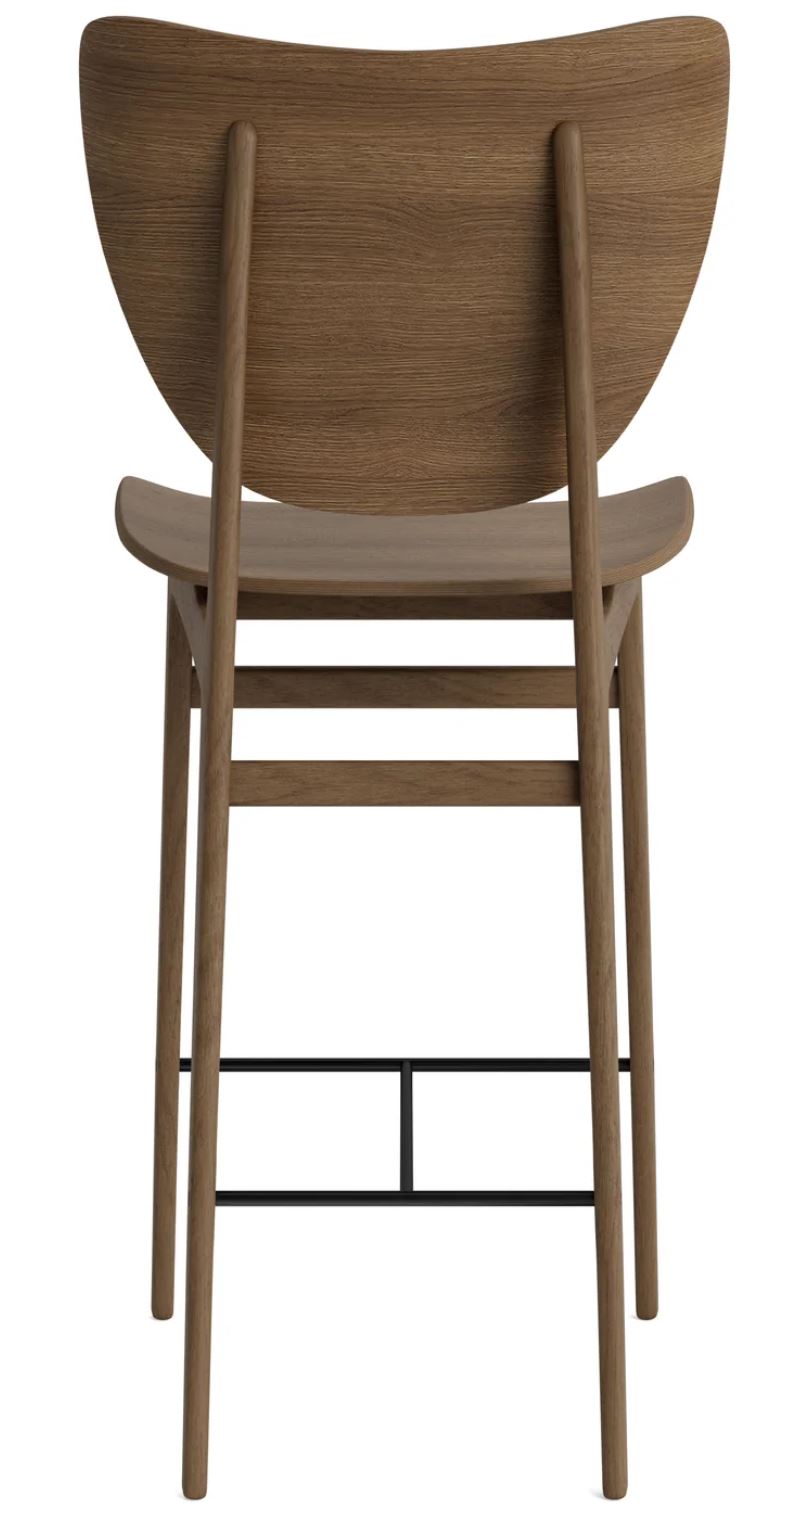 NORR11 ELEPHANT BAR CHAIR UN-UPHOLSTERED - $2,000